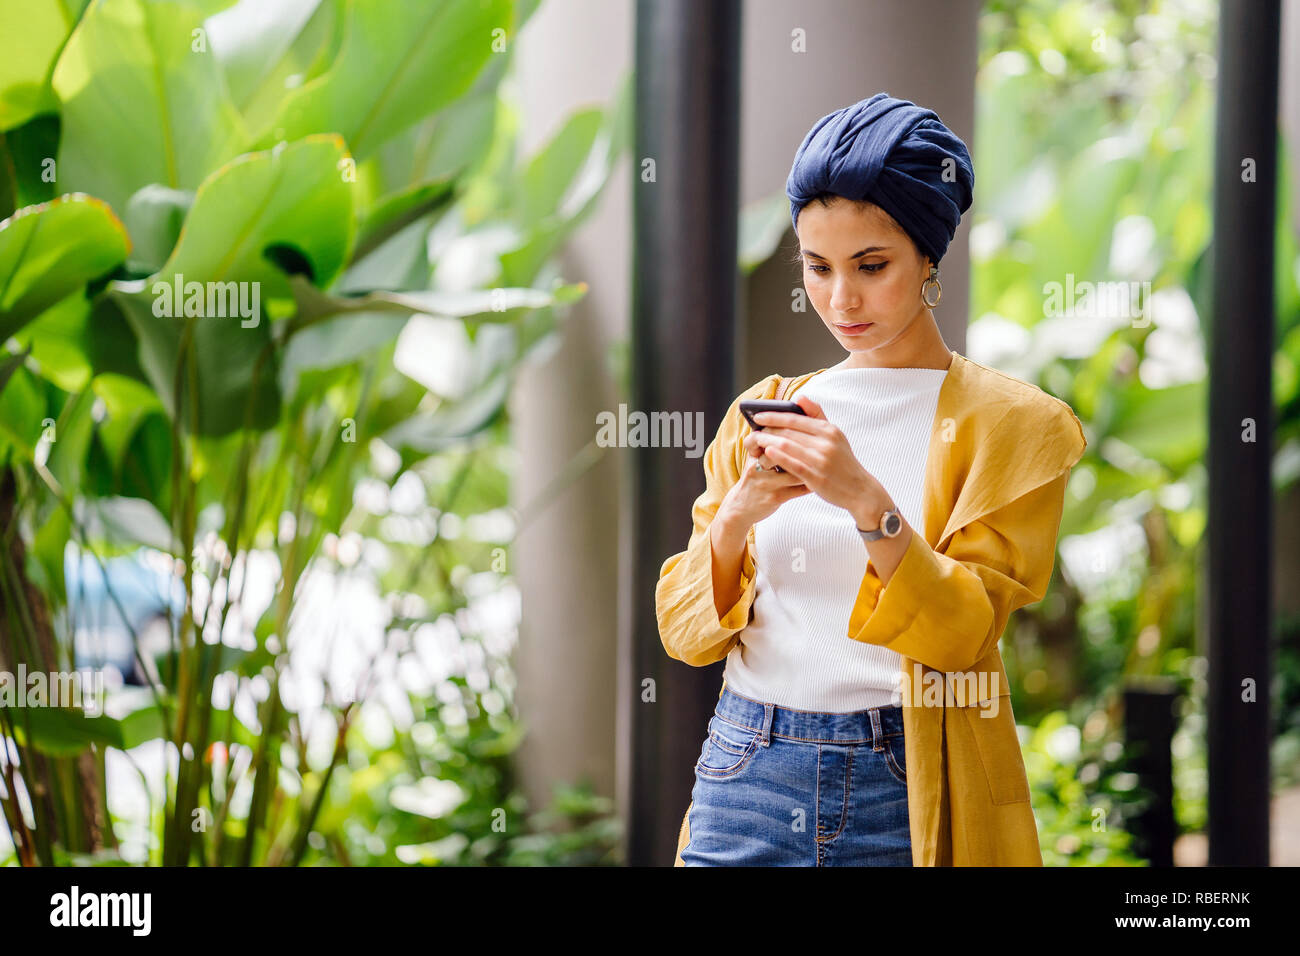 A Middle Eastern Arab woman in a headscarf is texting and messaging on her smartphone on a street in the city during the day. Stock Photo